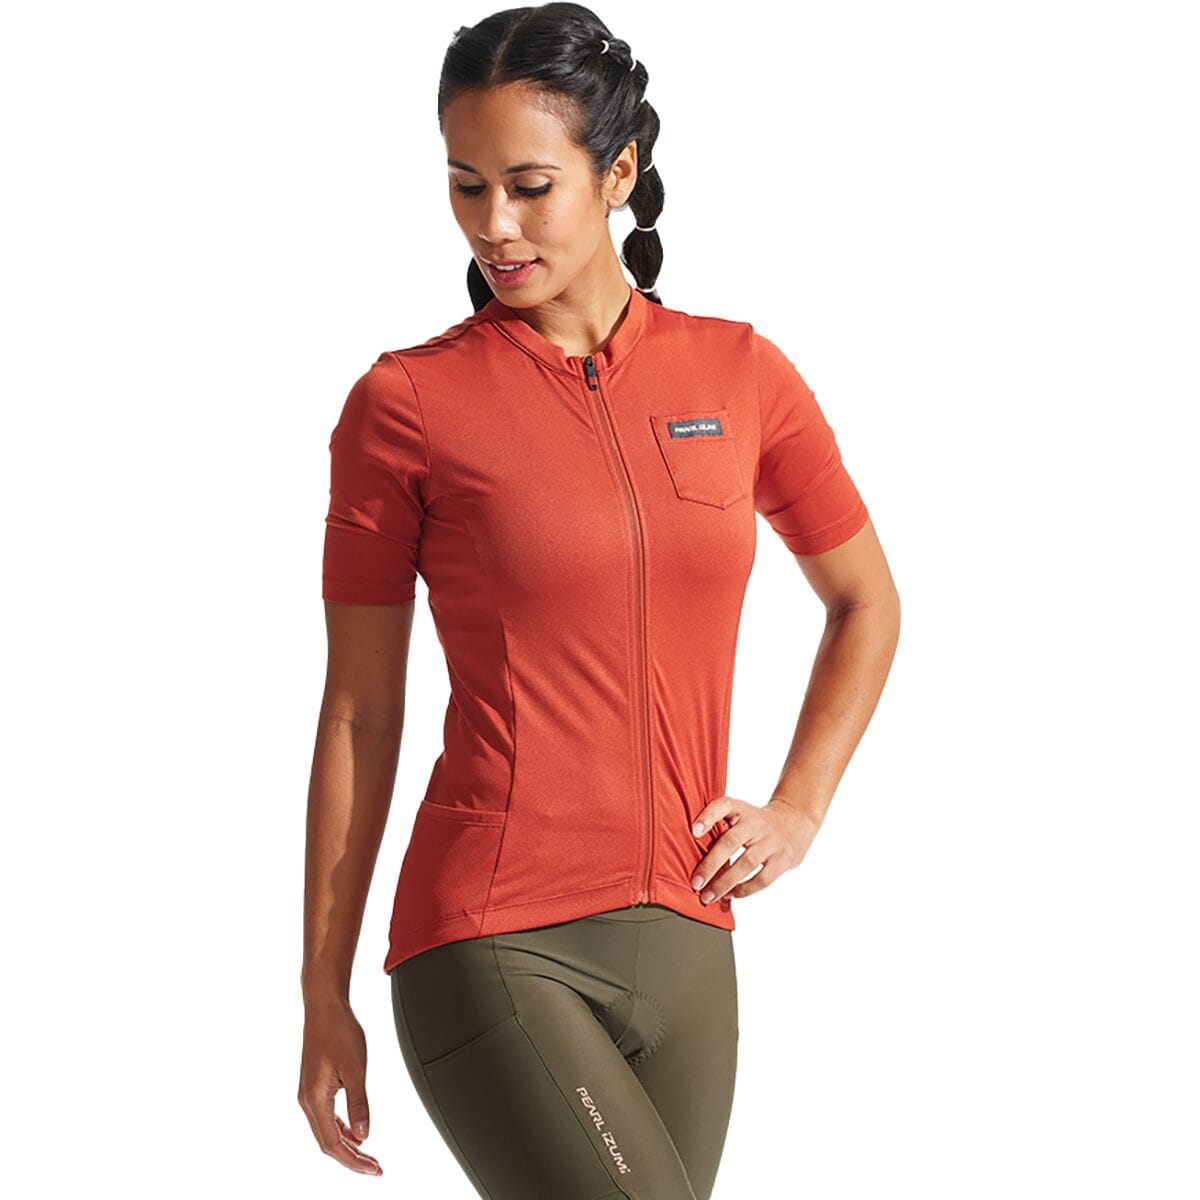 PEARL iZUMi Expedition Jersey - Women's